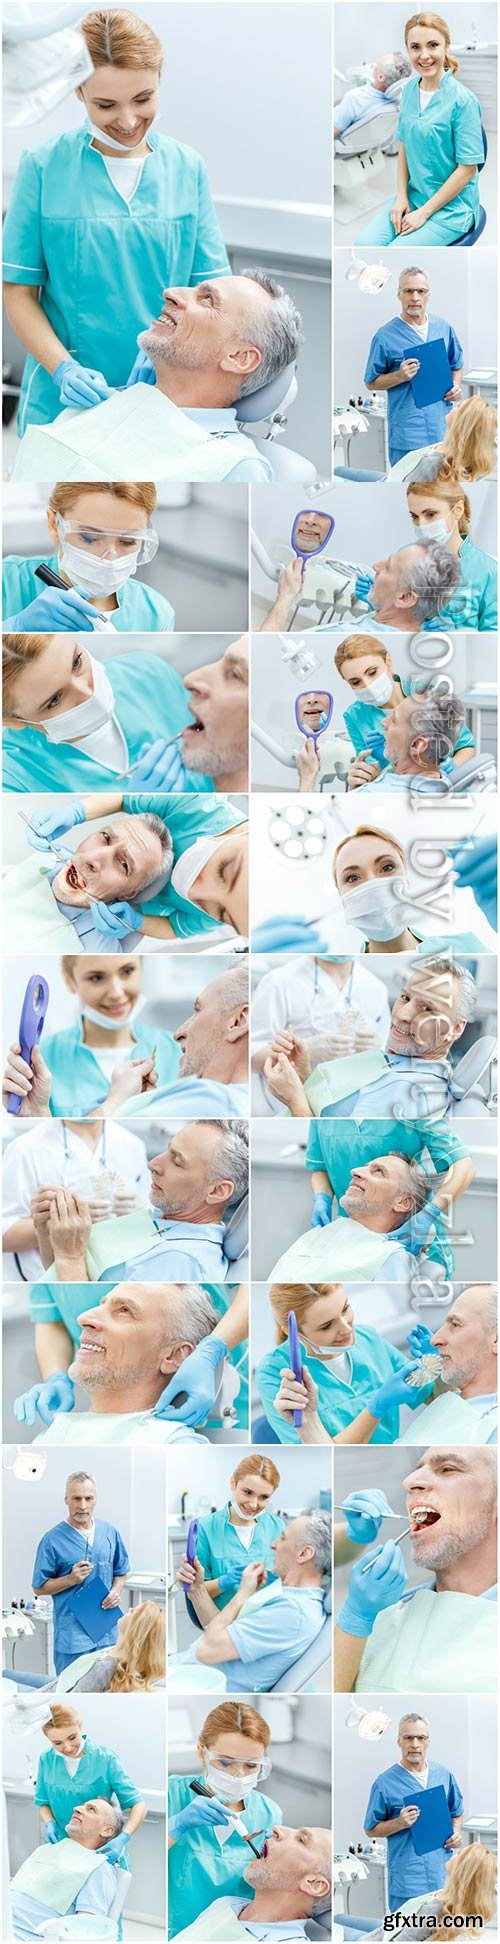 Dentist appointment stock photo